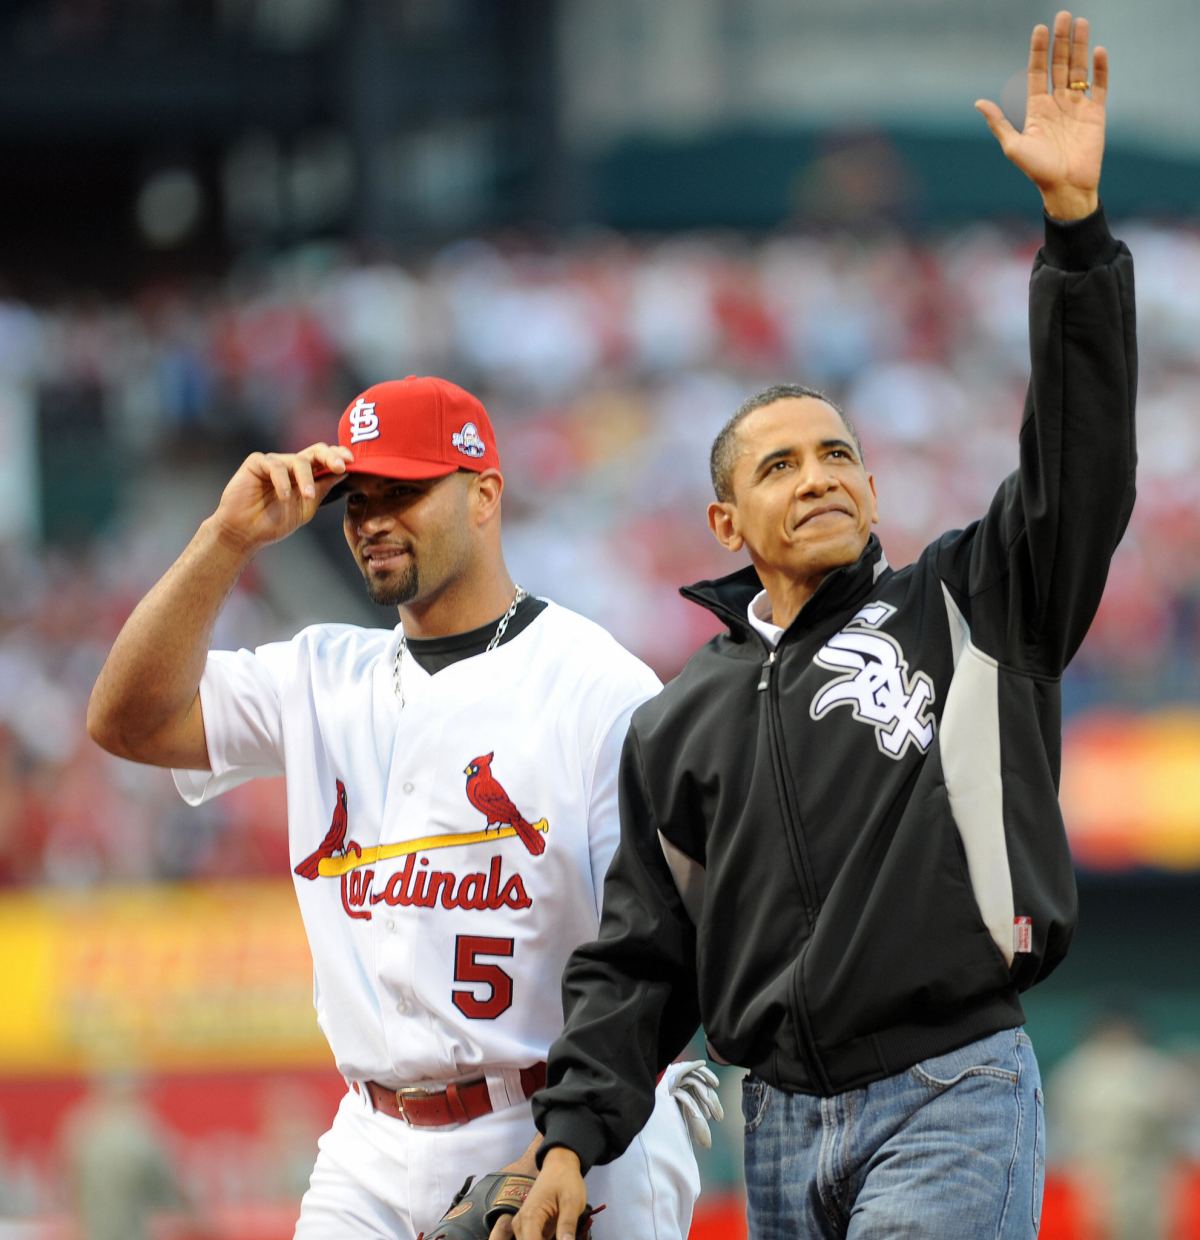 Barack Obama waves after throwing out the first pitch to Albert Pujols at the 2009 All-Star Game.